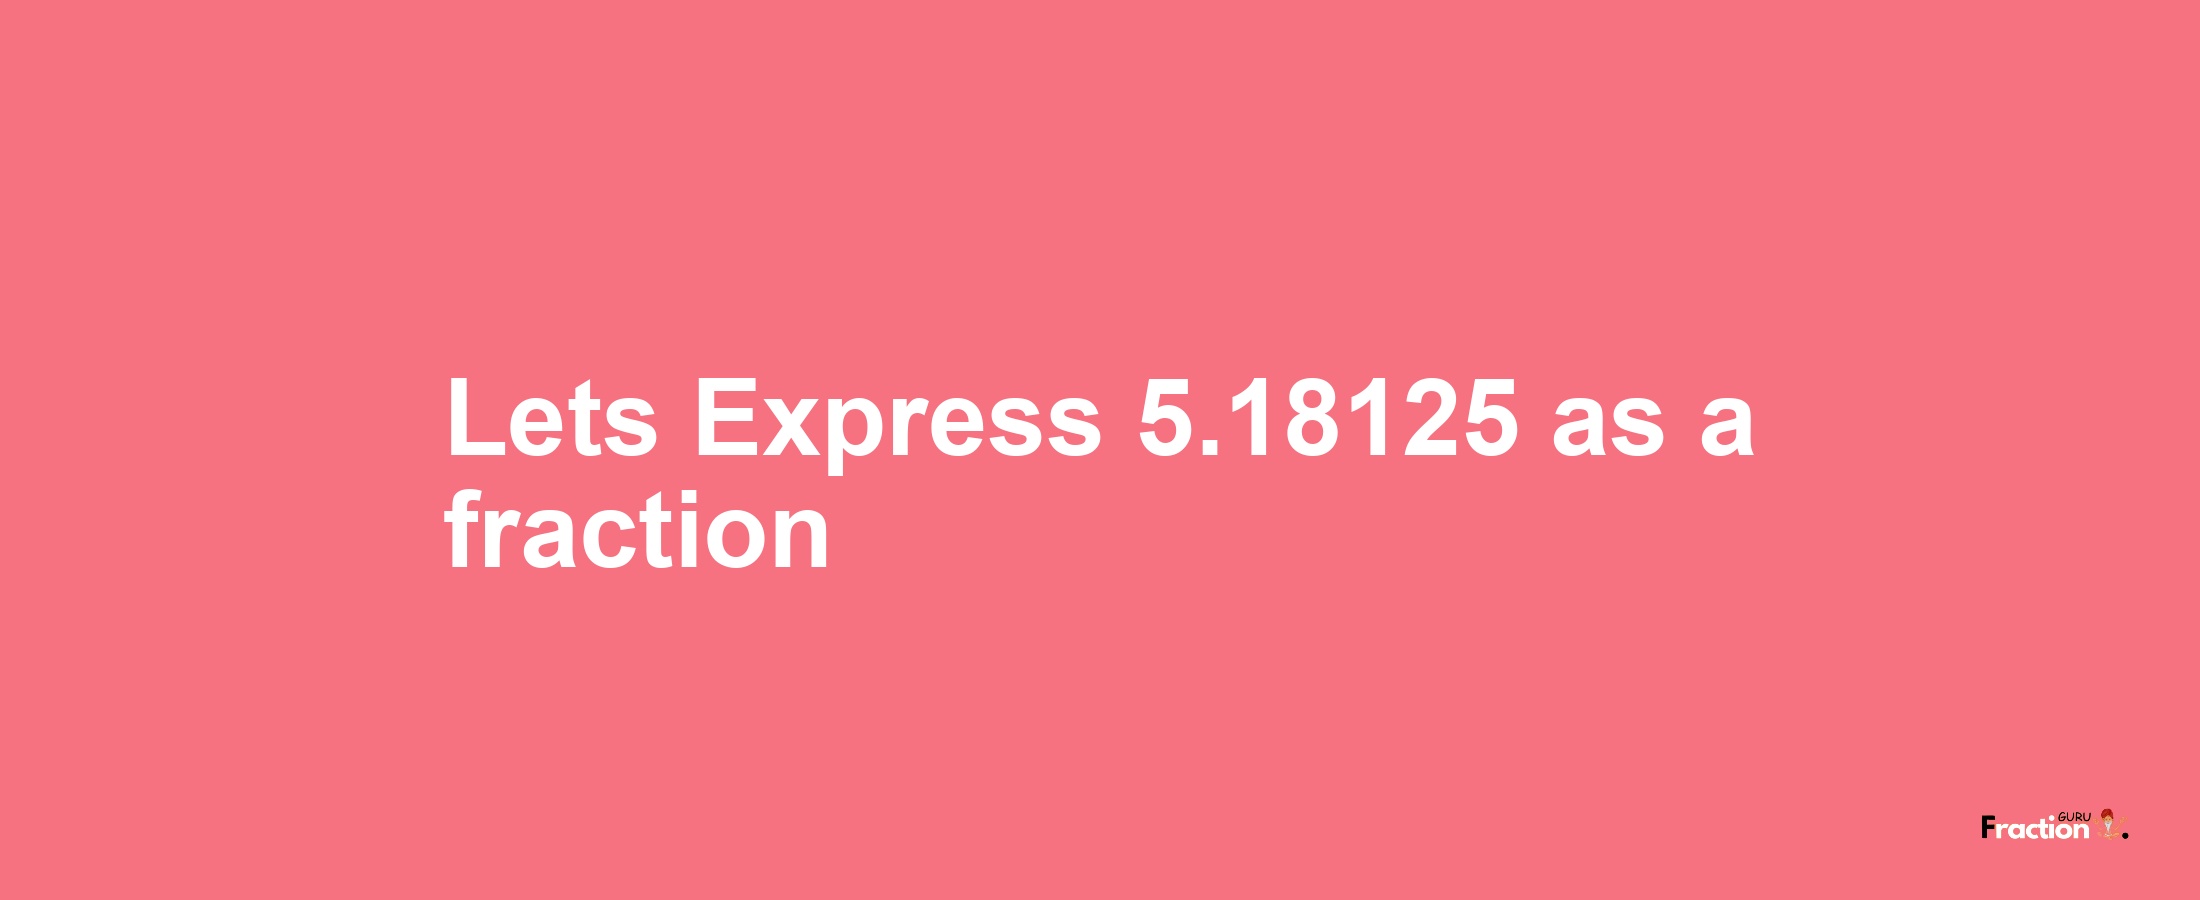 Lets Express 5.18125 as afraction